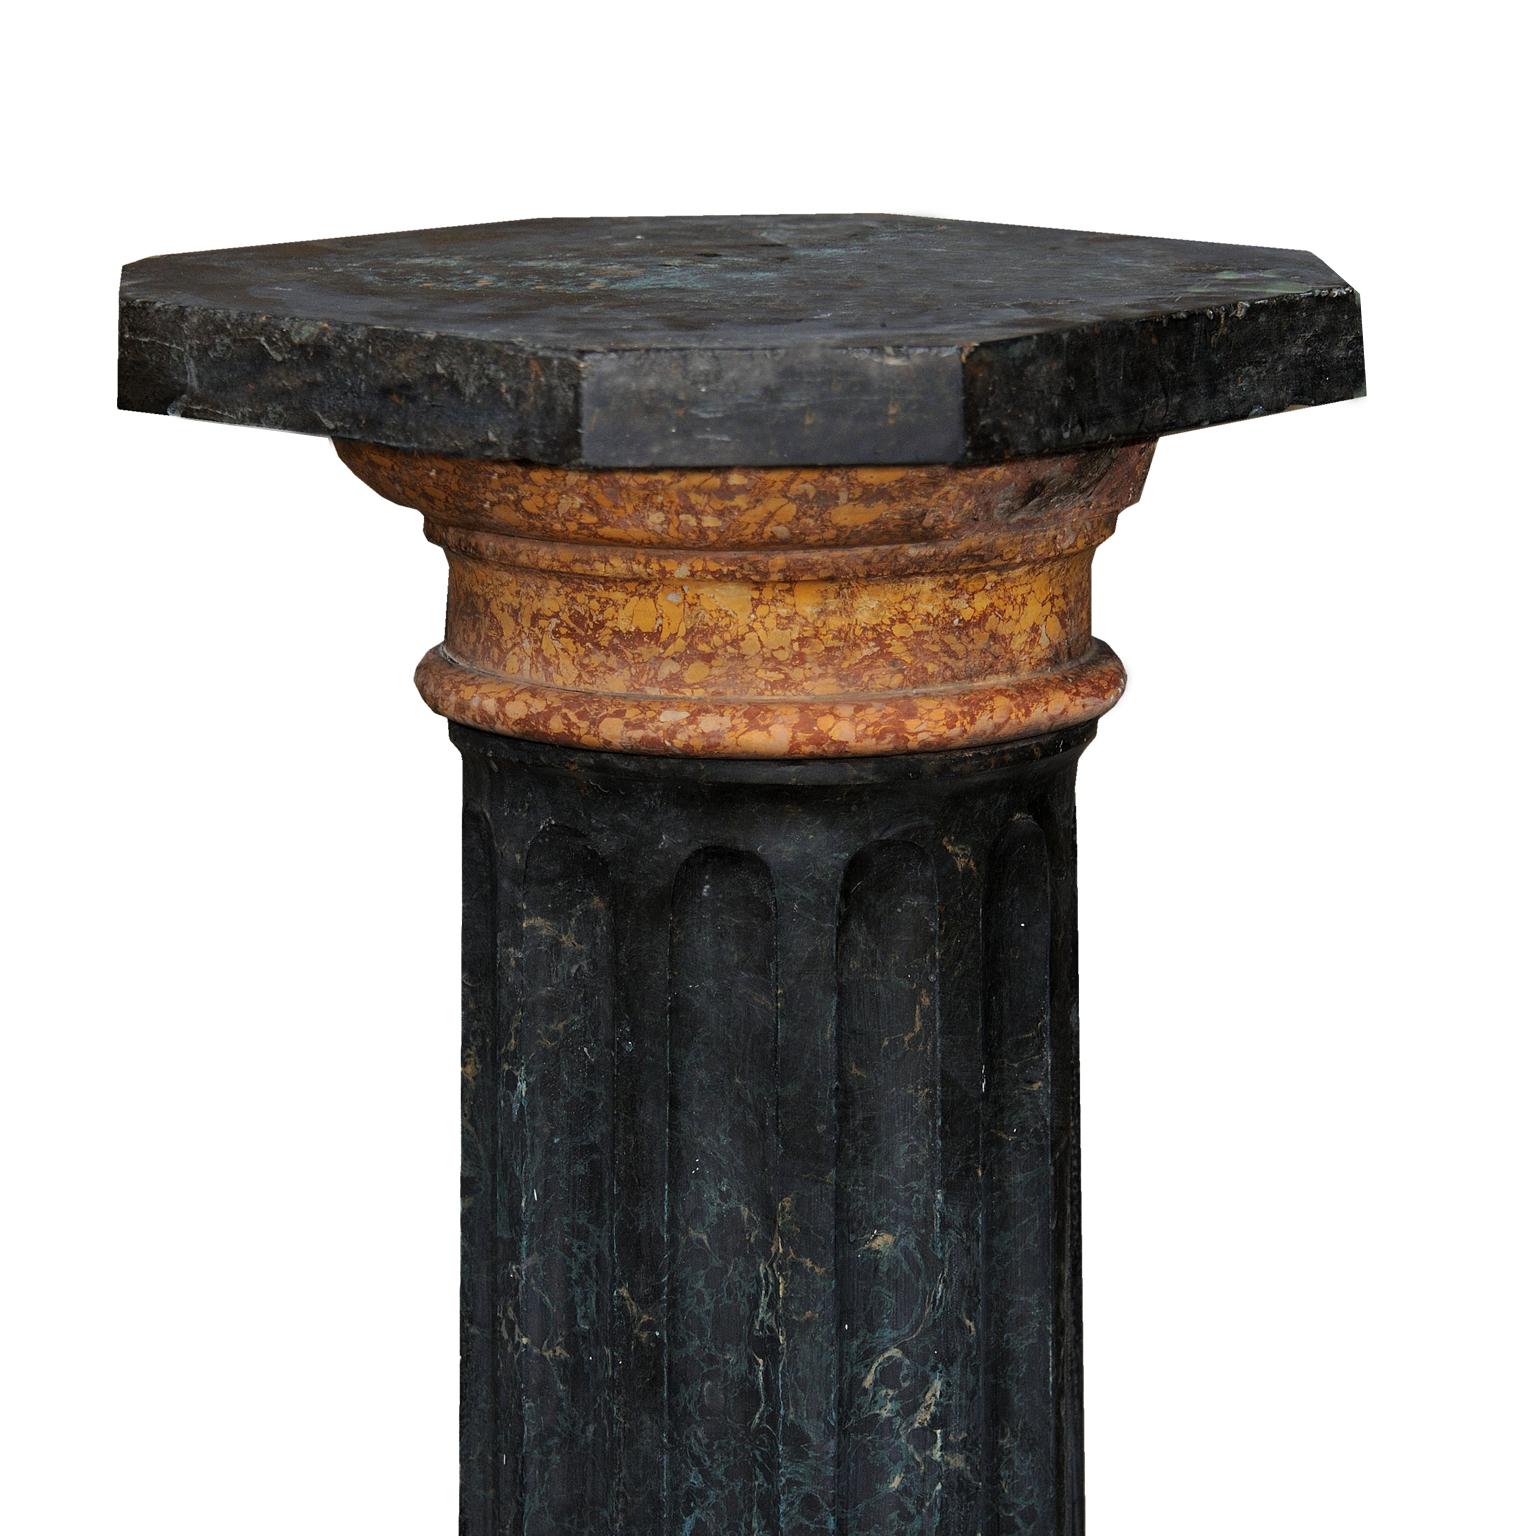 A mid-19th century Italian neoclassical style painted Scagliola column, circa 1850. 

Measures: Height: 115 cm (45